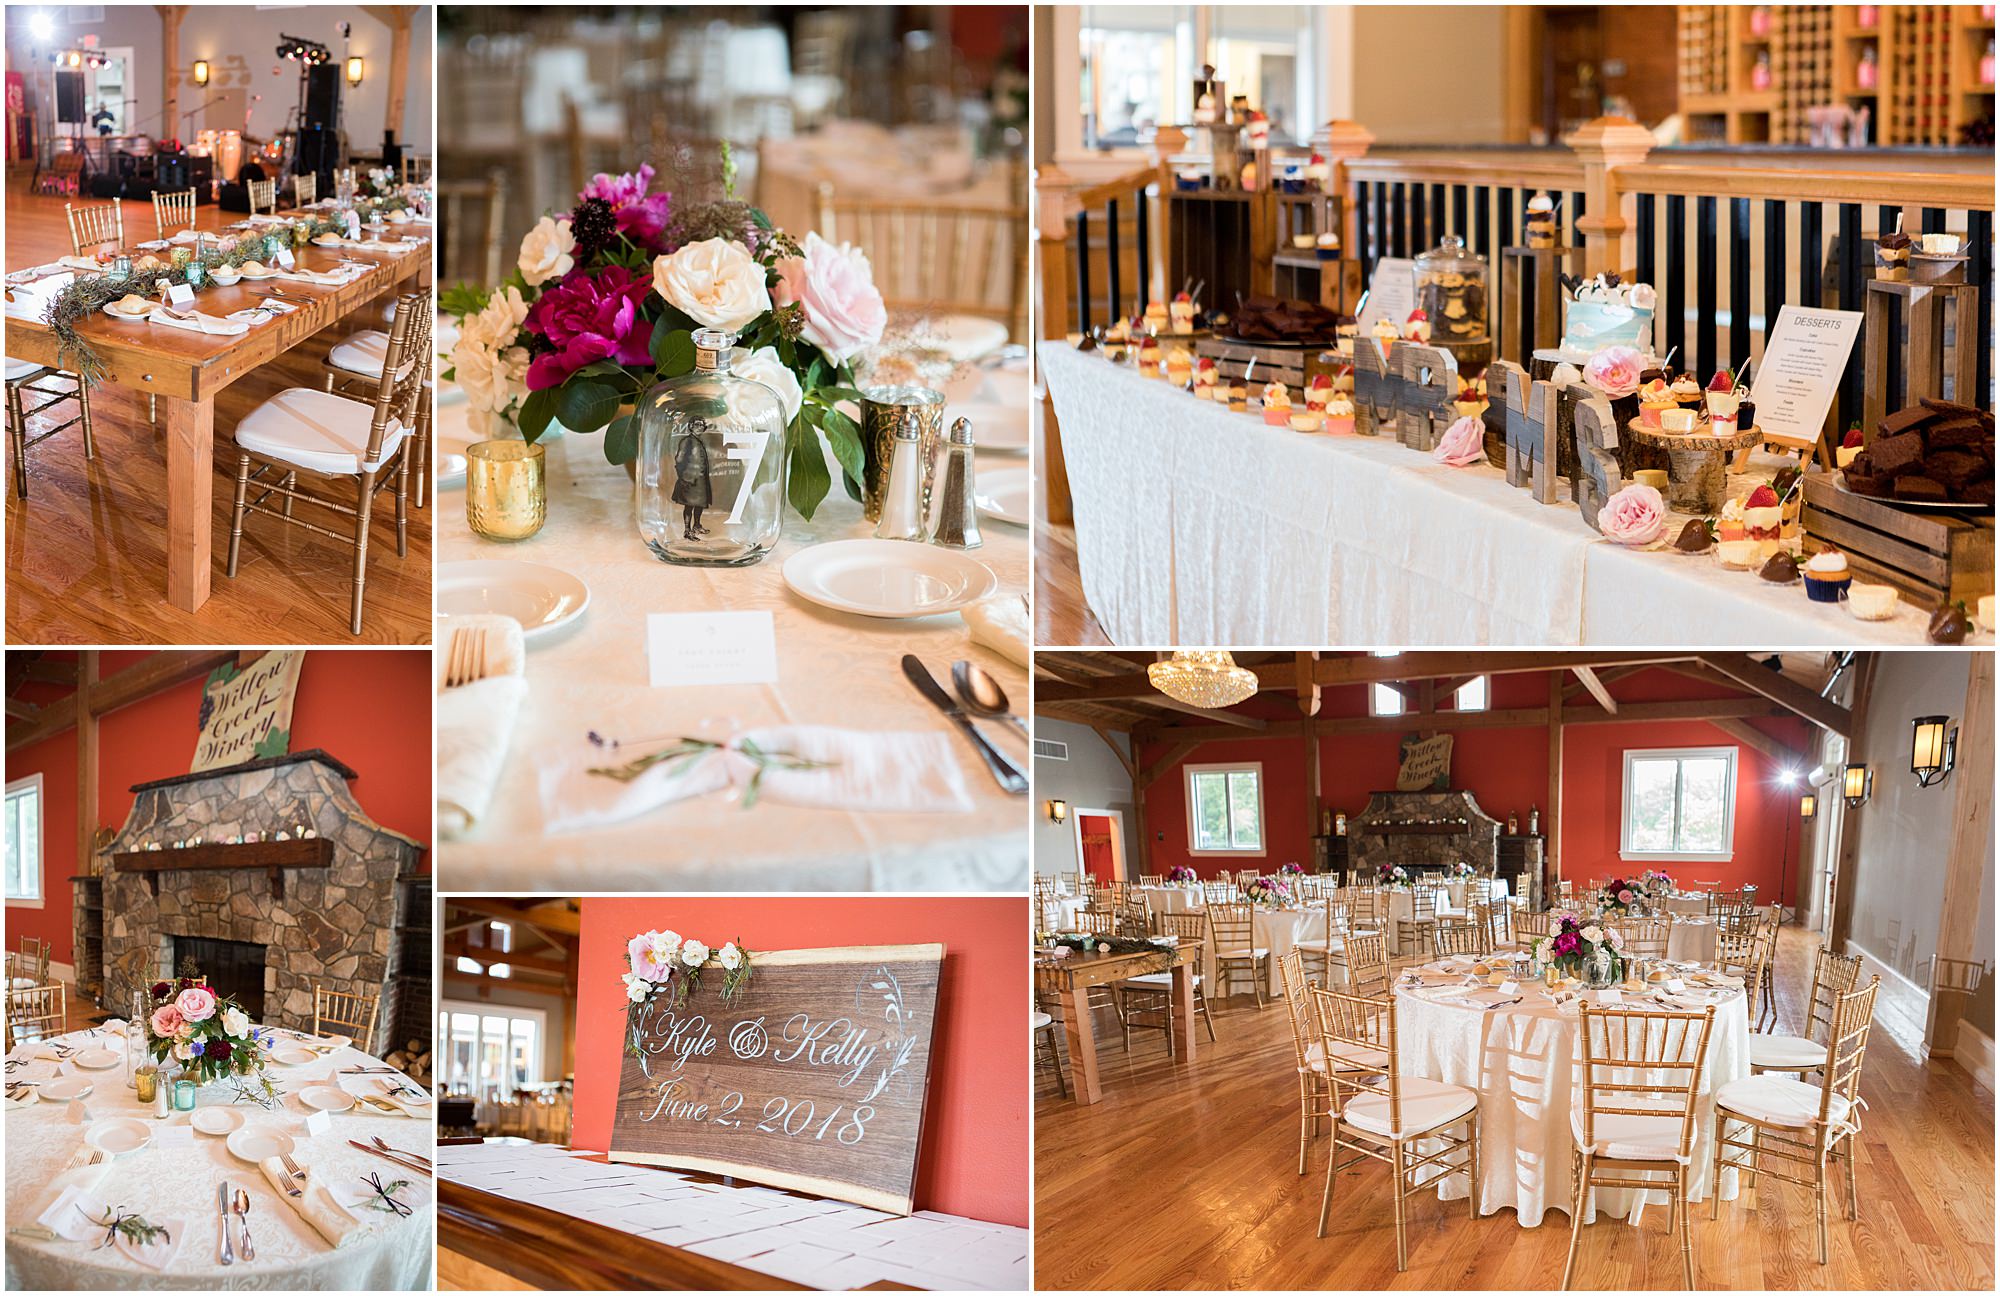 Best Wedding Venues in Cape May: Willow Creek Winery Reception Decor